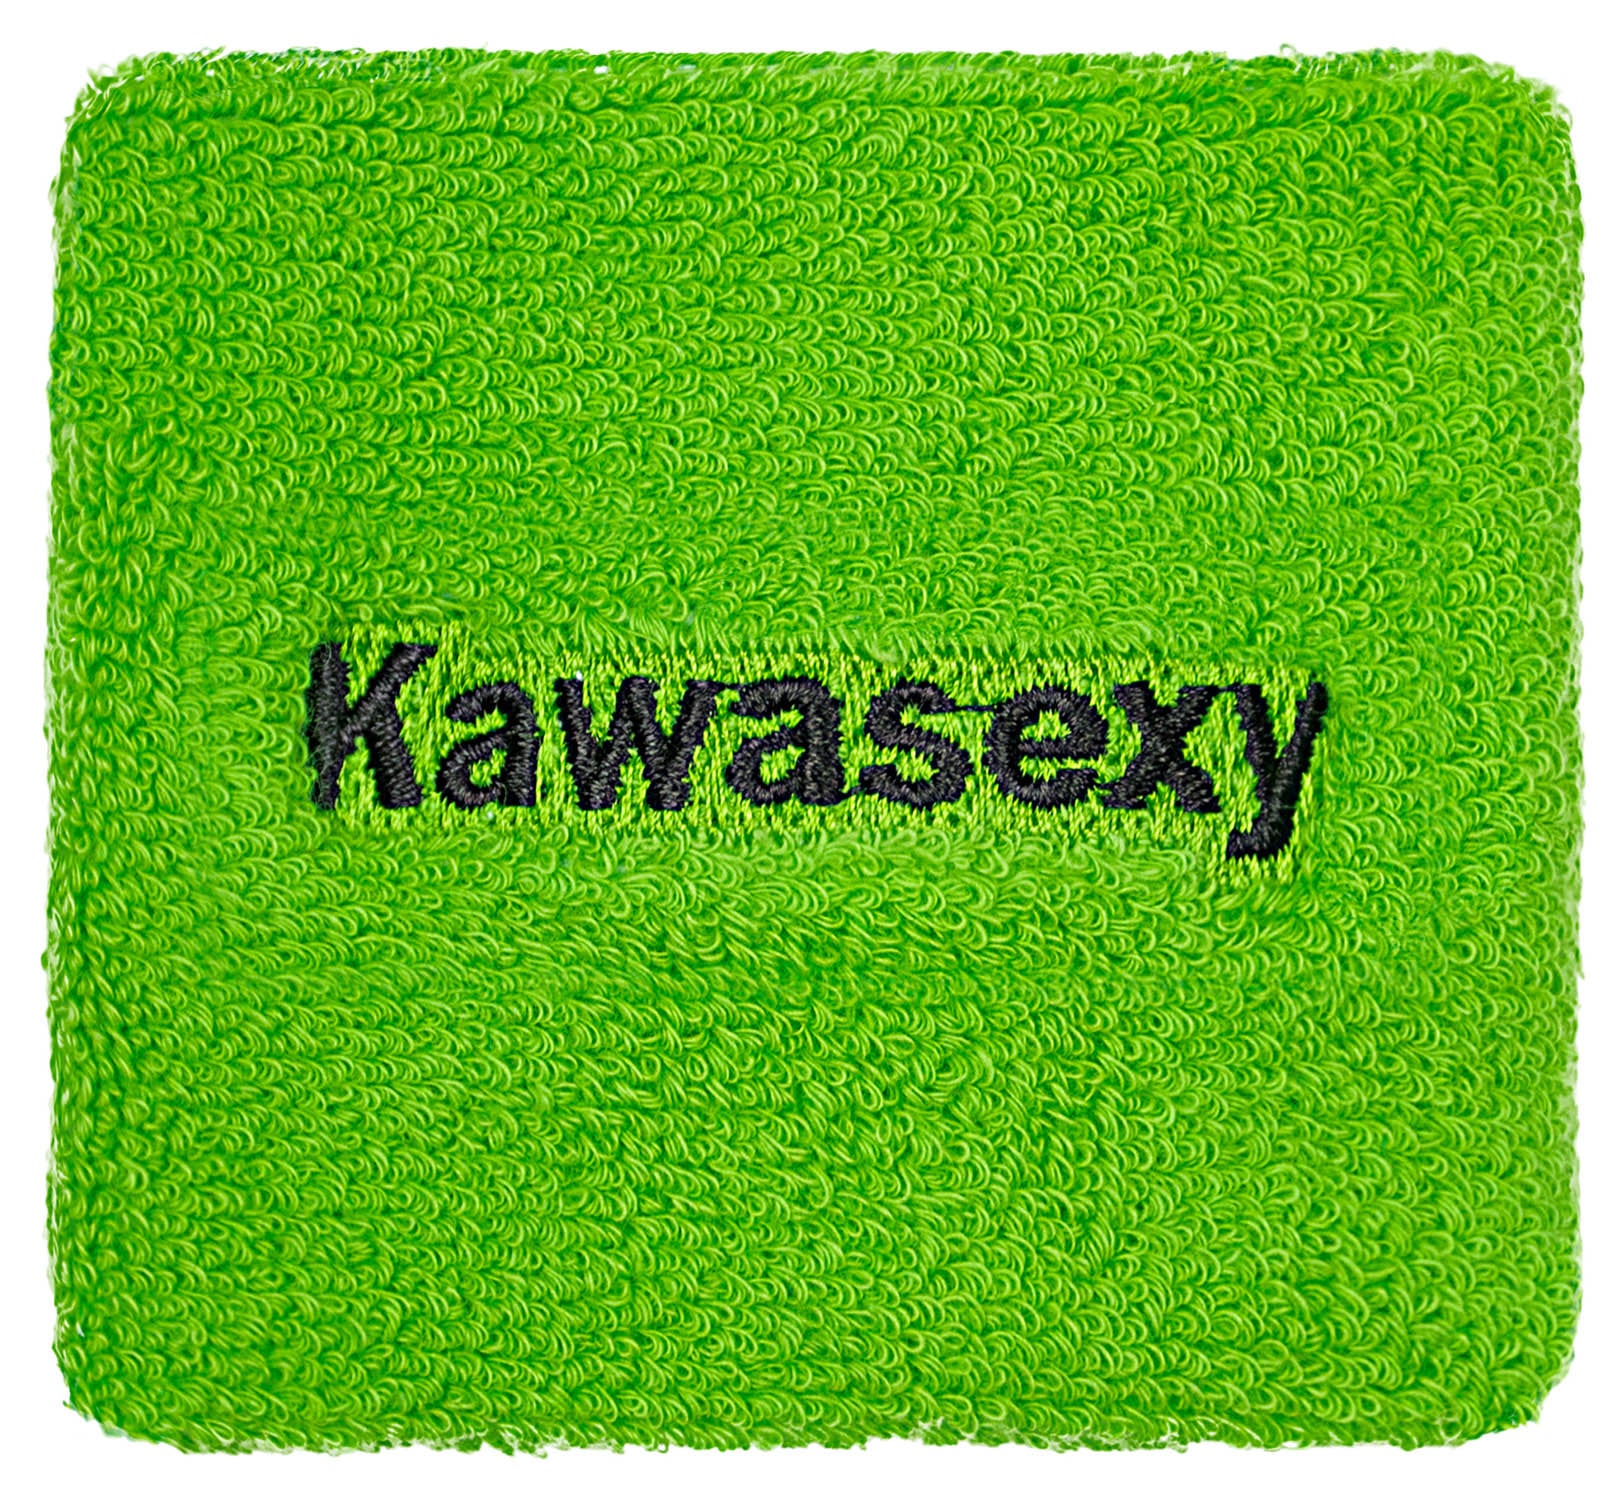 Kawasexy - Reservoir Cover